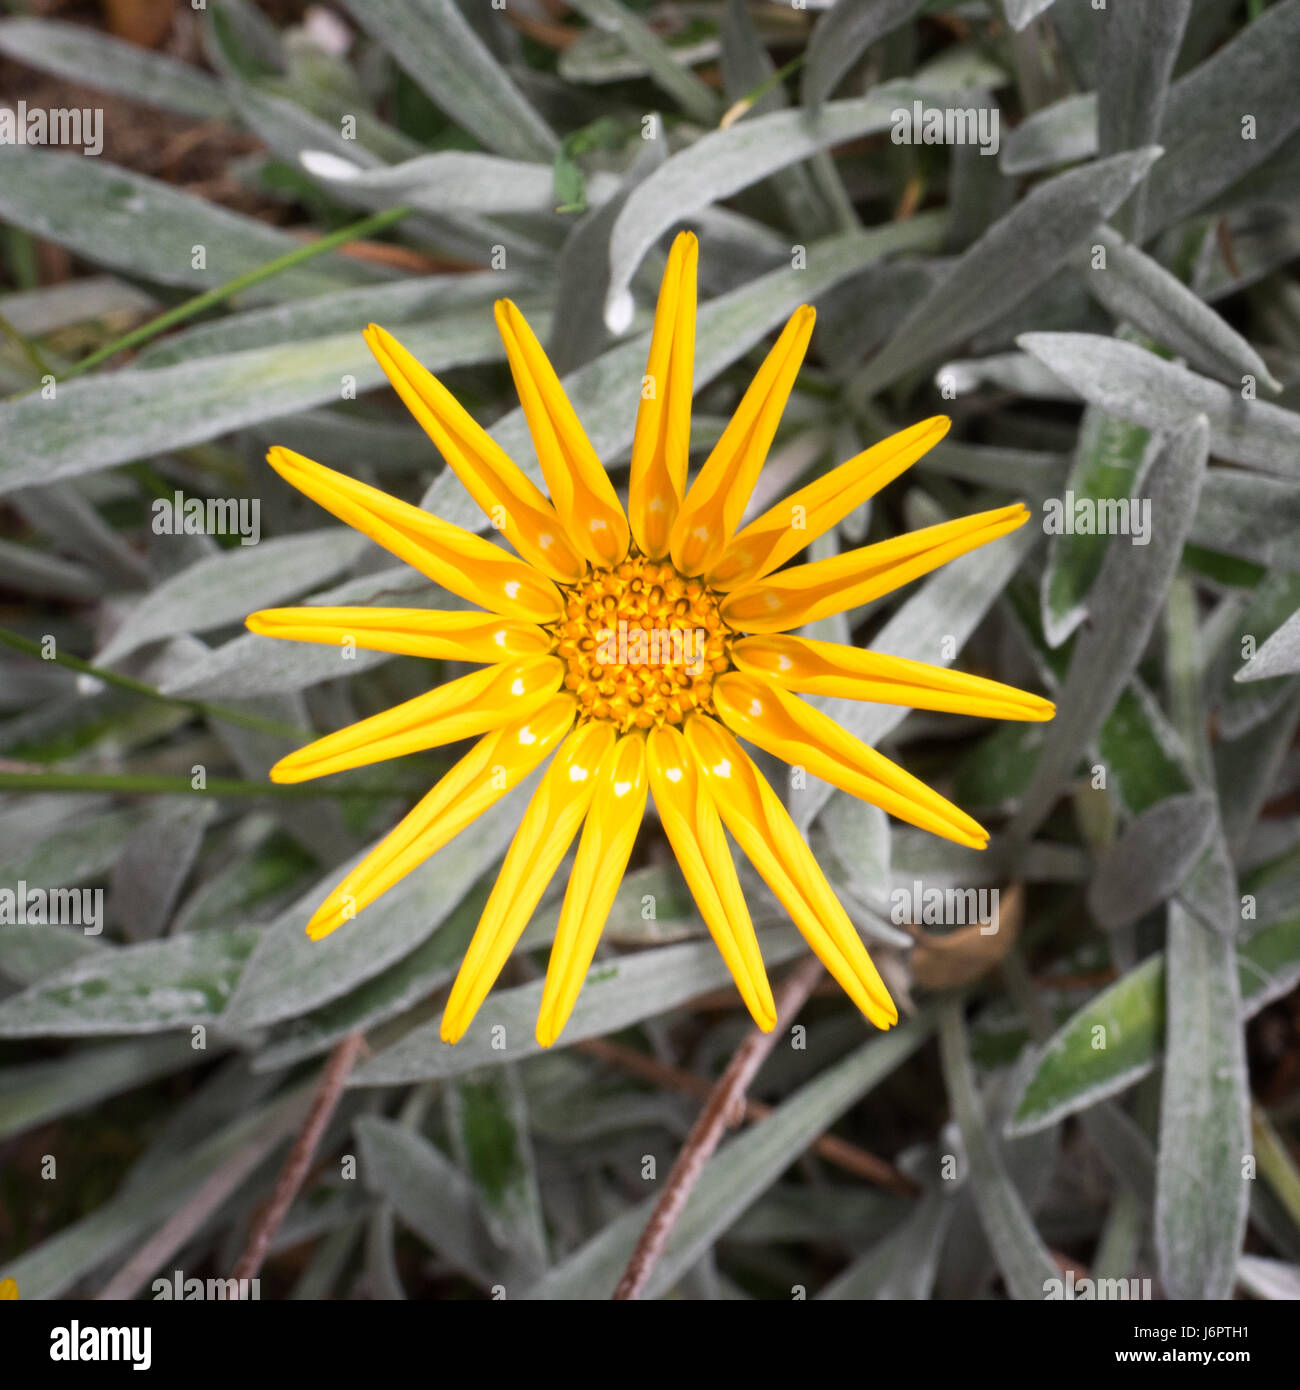 a close up detail of a single one 1 yellow sun star shape Chaetanthera glabrata flower face on against a background of silver green leaves Stock Photo